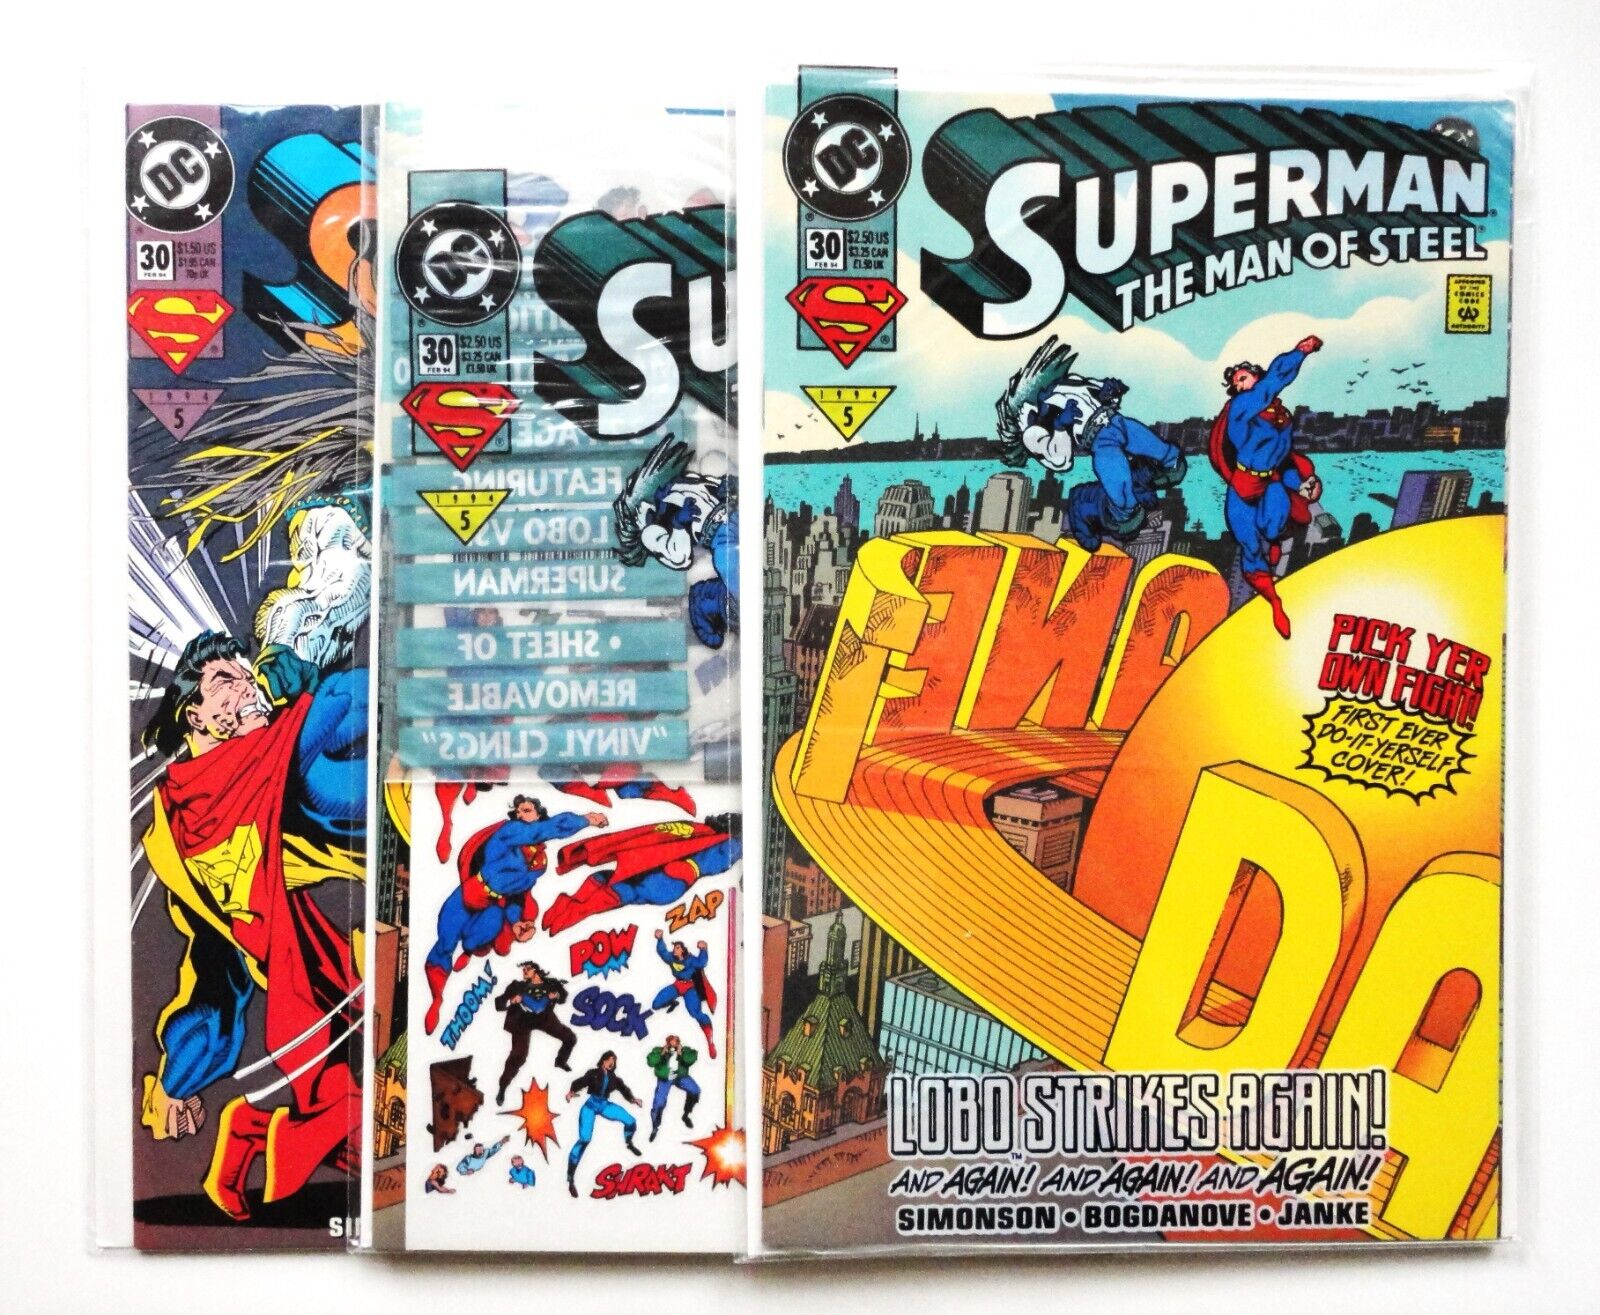 SUPERMAN MAN OF STEEL - #30 x 3: Polybagged (sealed & open), Direct Edition NM-M